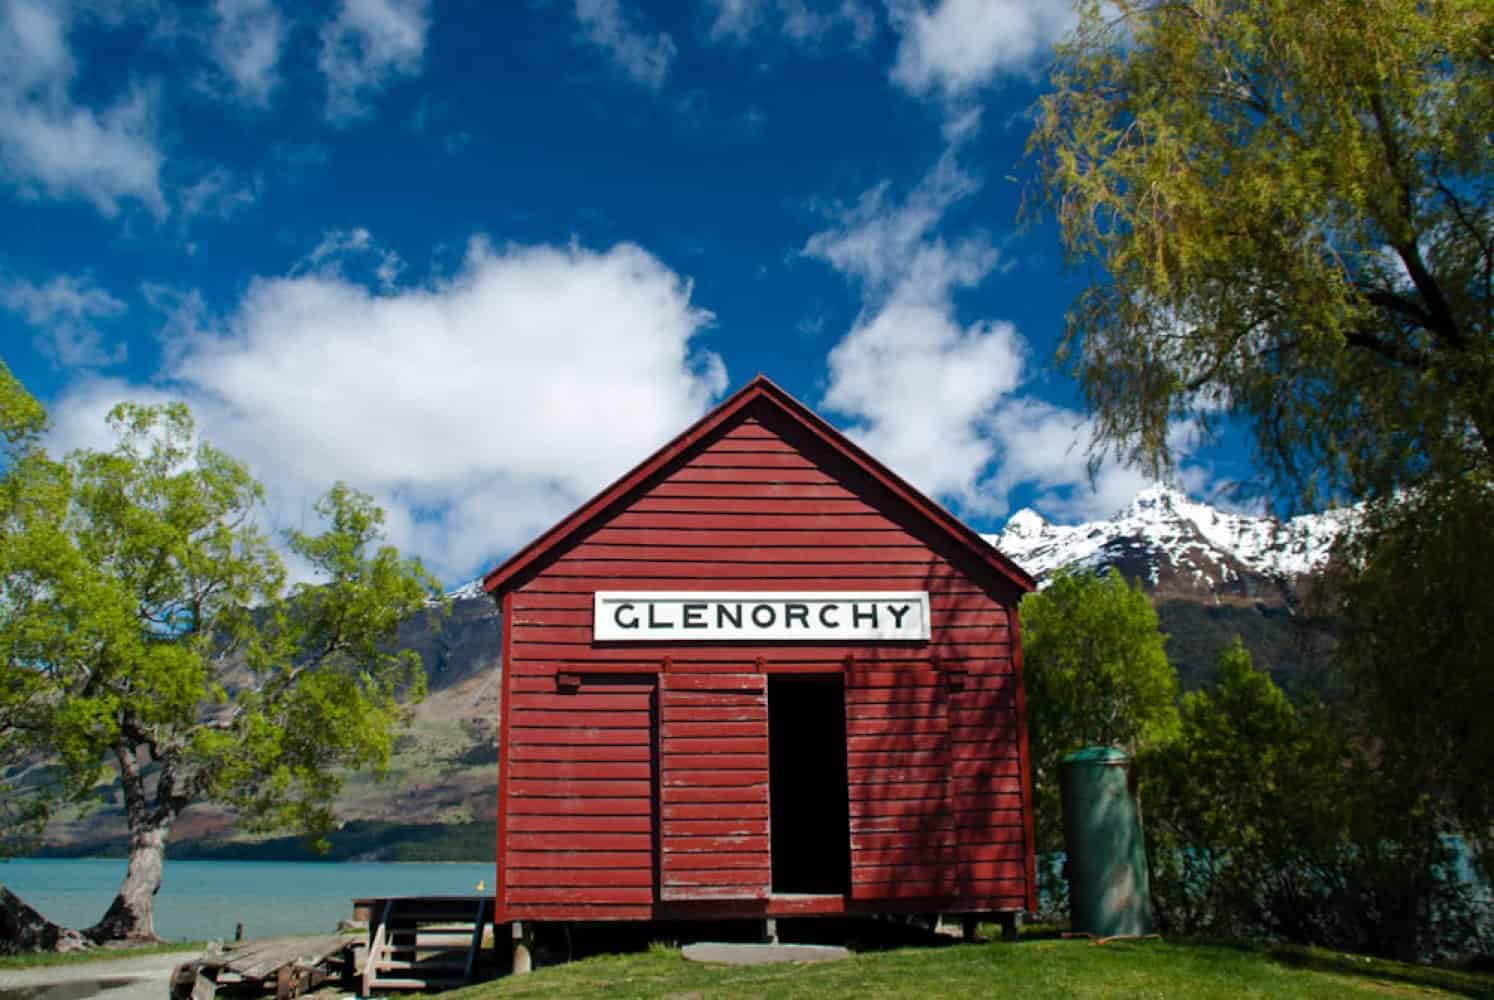 The famous red shed in Glenorchy Queenstown